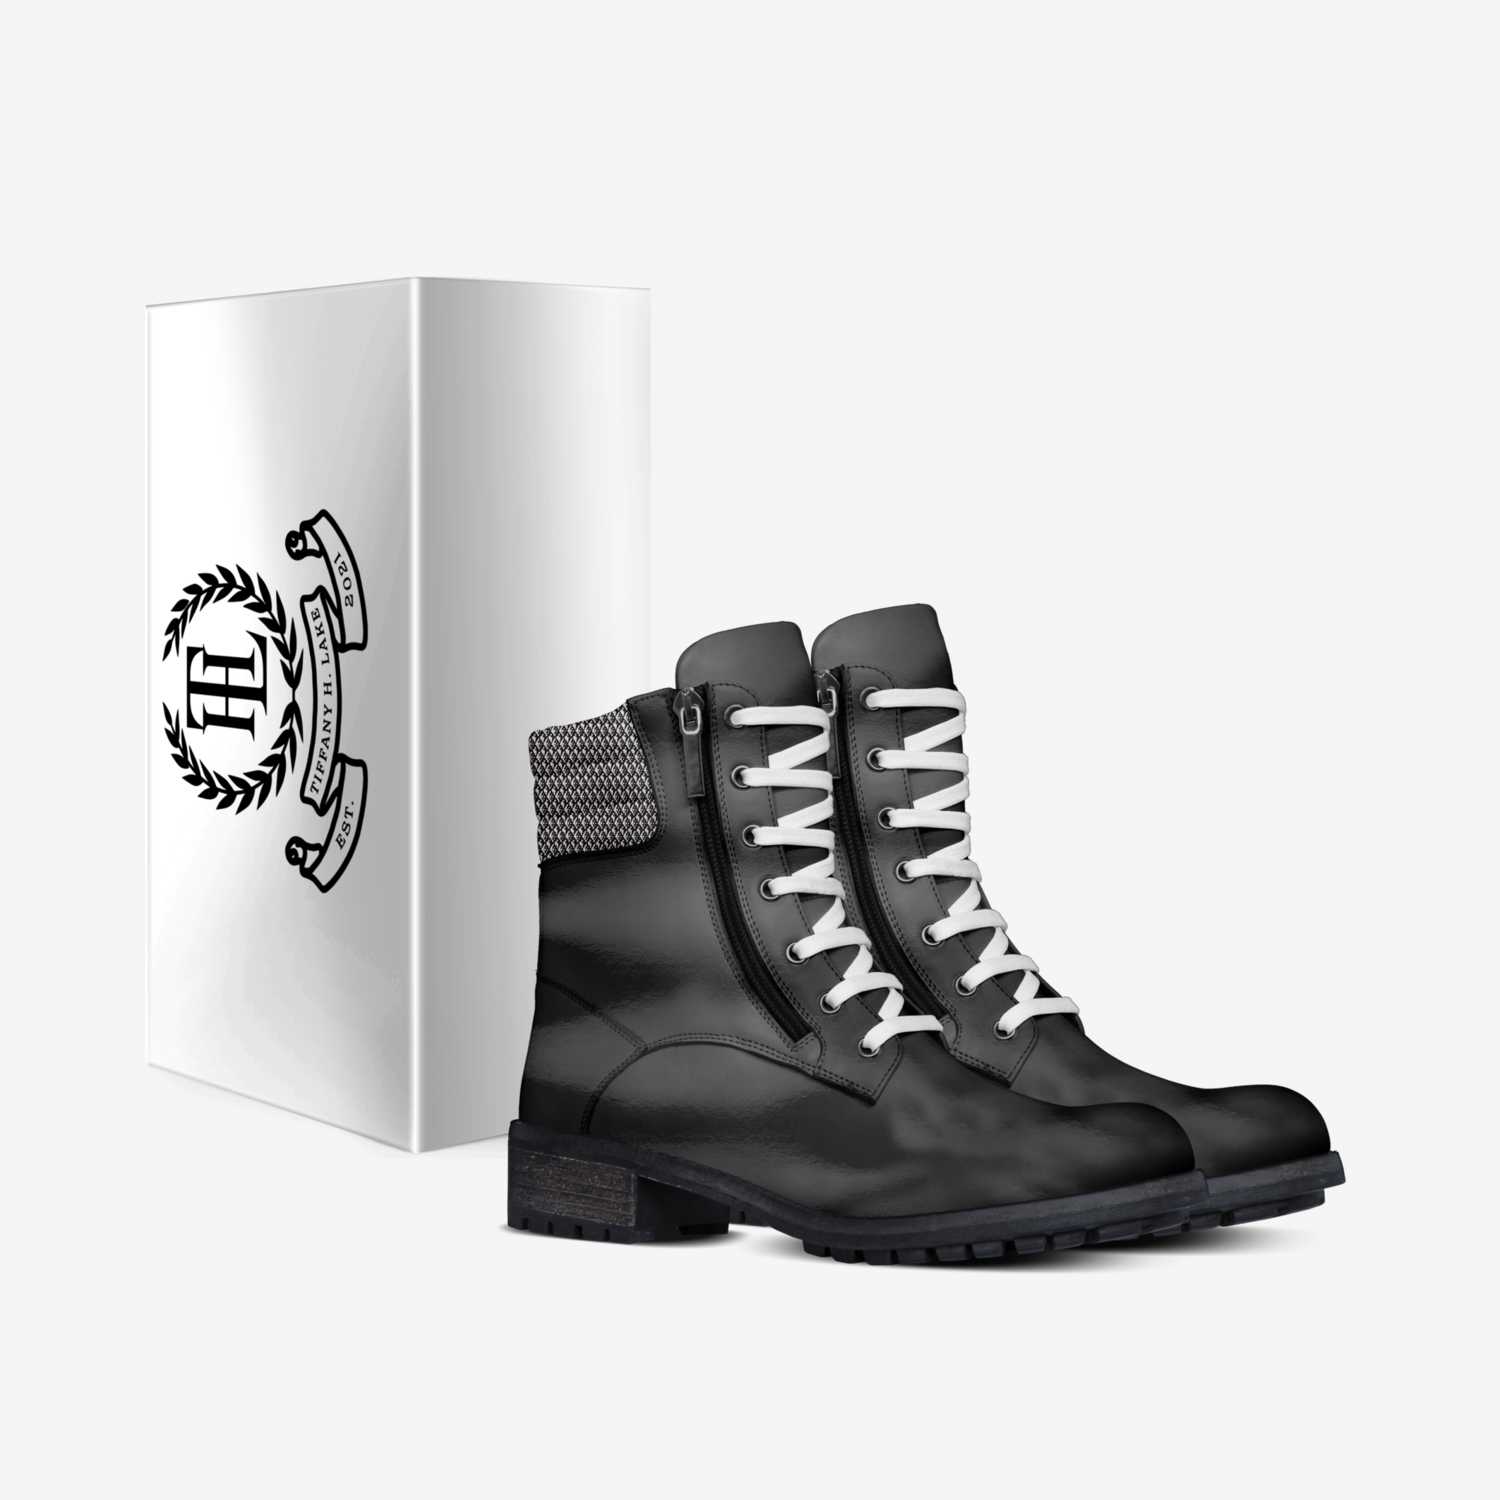 COMBAT custom made in Italy shoes by Tiffany Lake | Box view